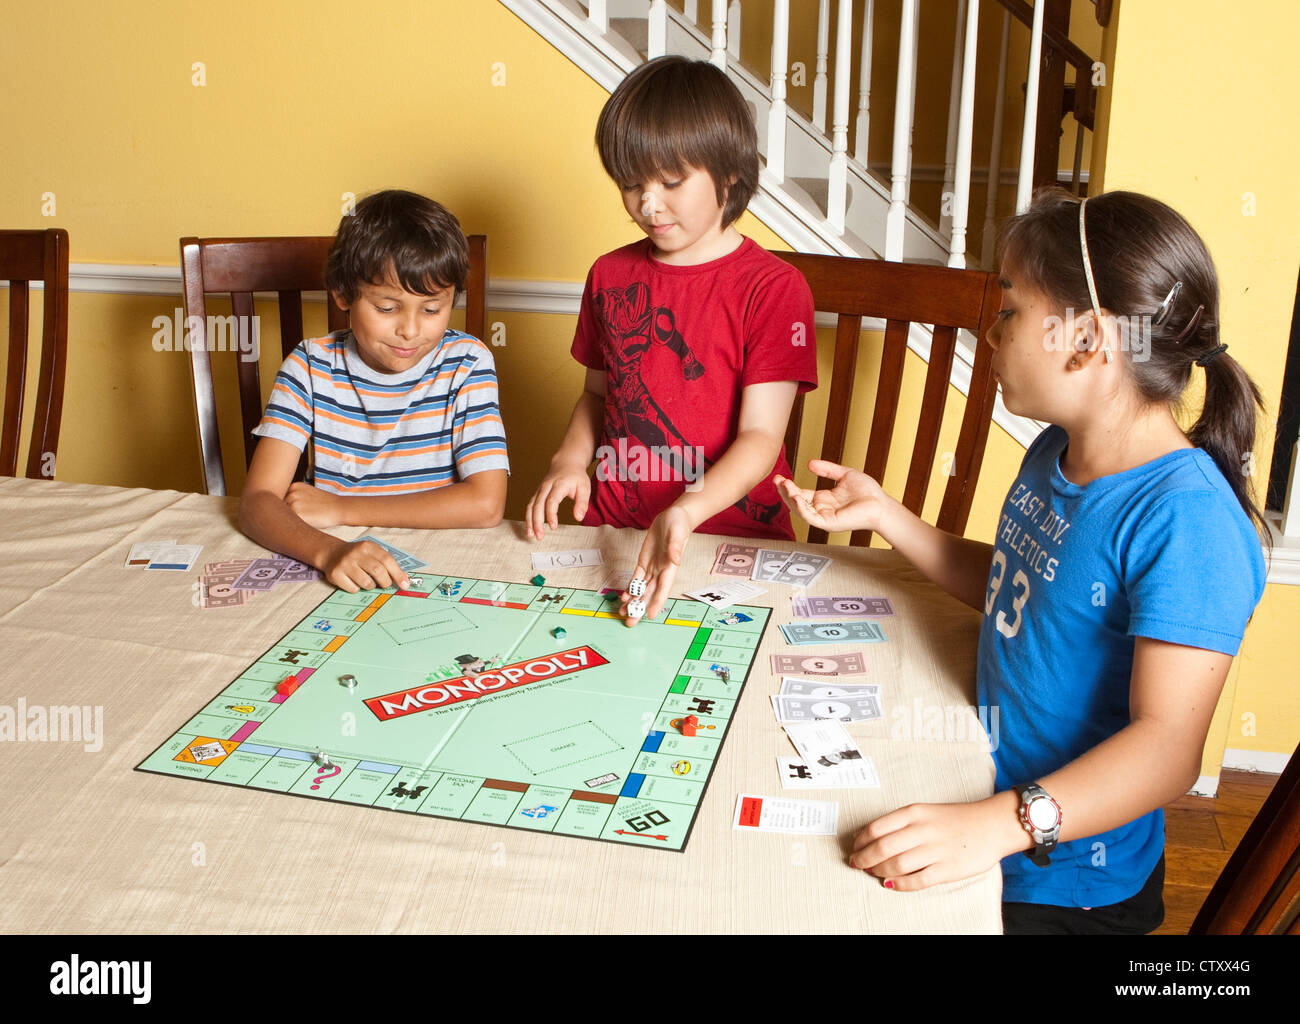 Multi Ethnic Group Of Friends Hispanic And Asian Play Board Game